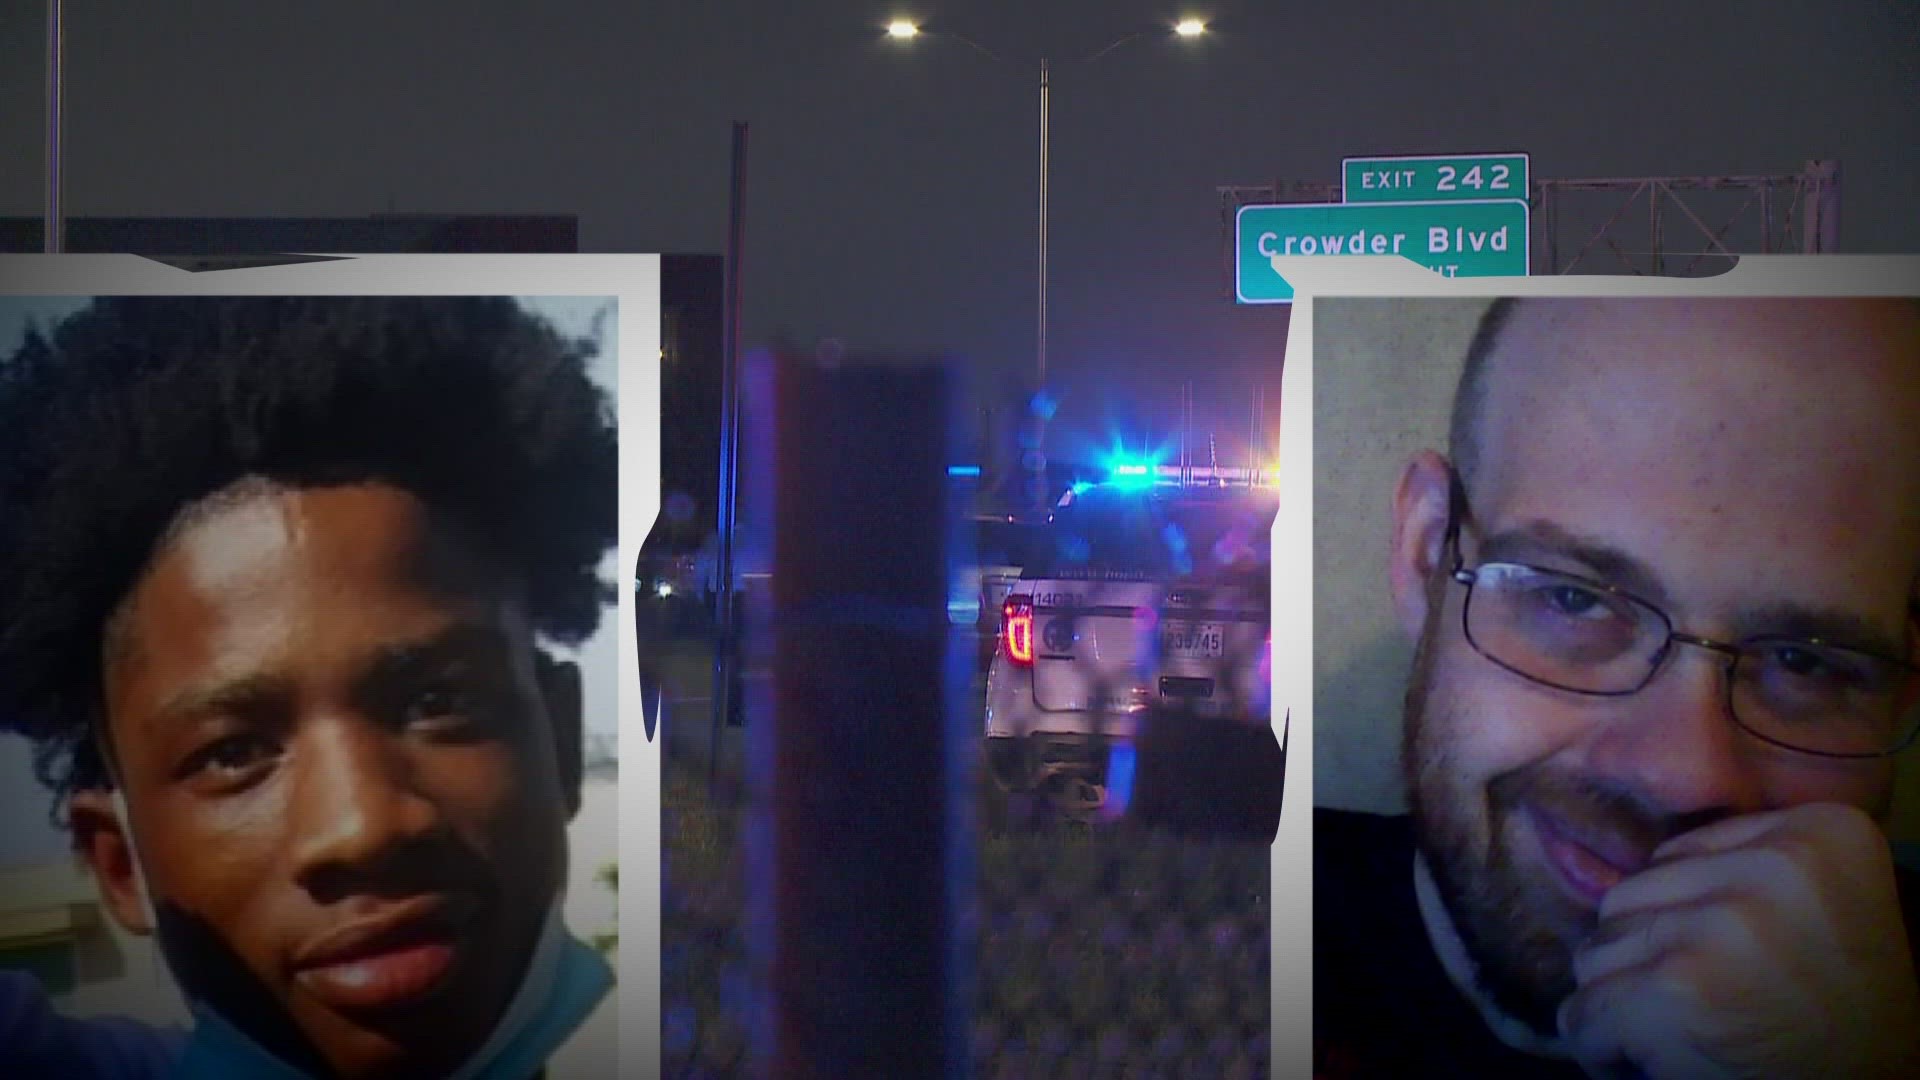 Mike Perlstein continues his investigation into a fatal shooting that spilled onto I-10. The suspect was wearing an ankle monitor. Were opportunities missed?